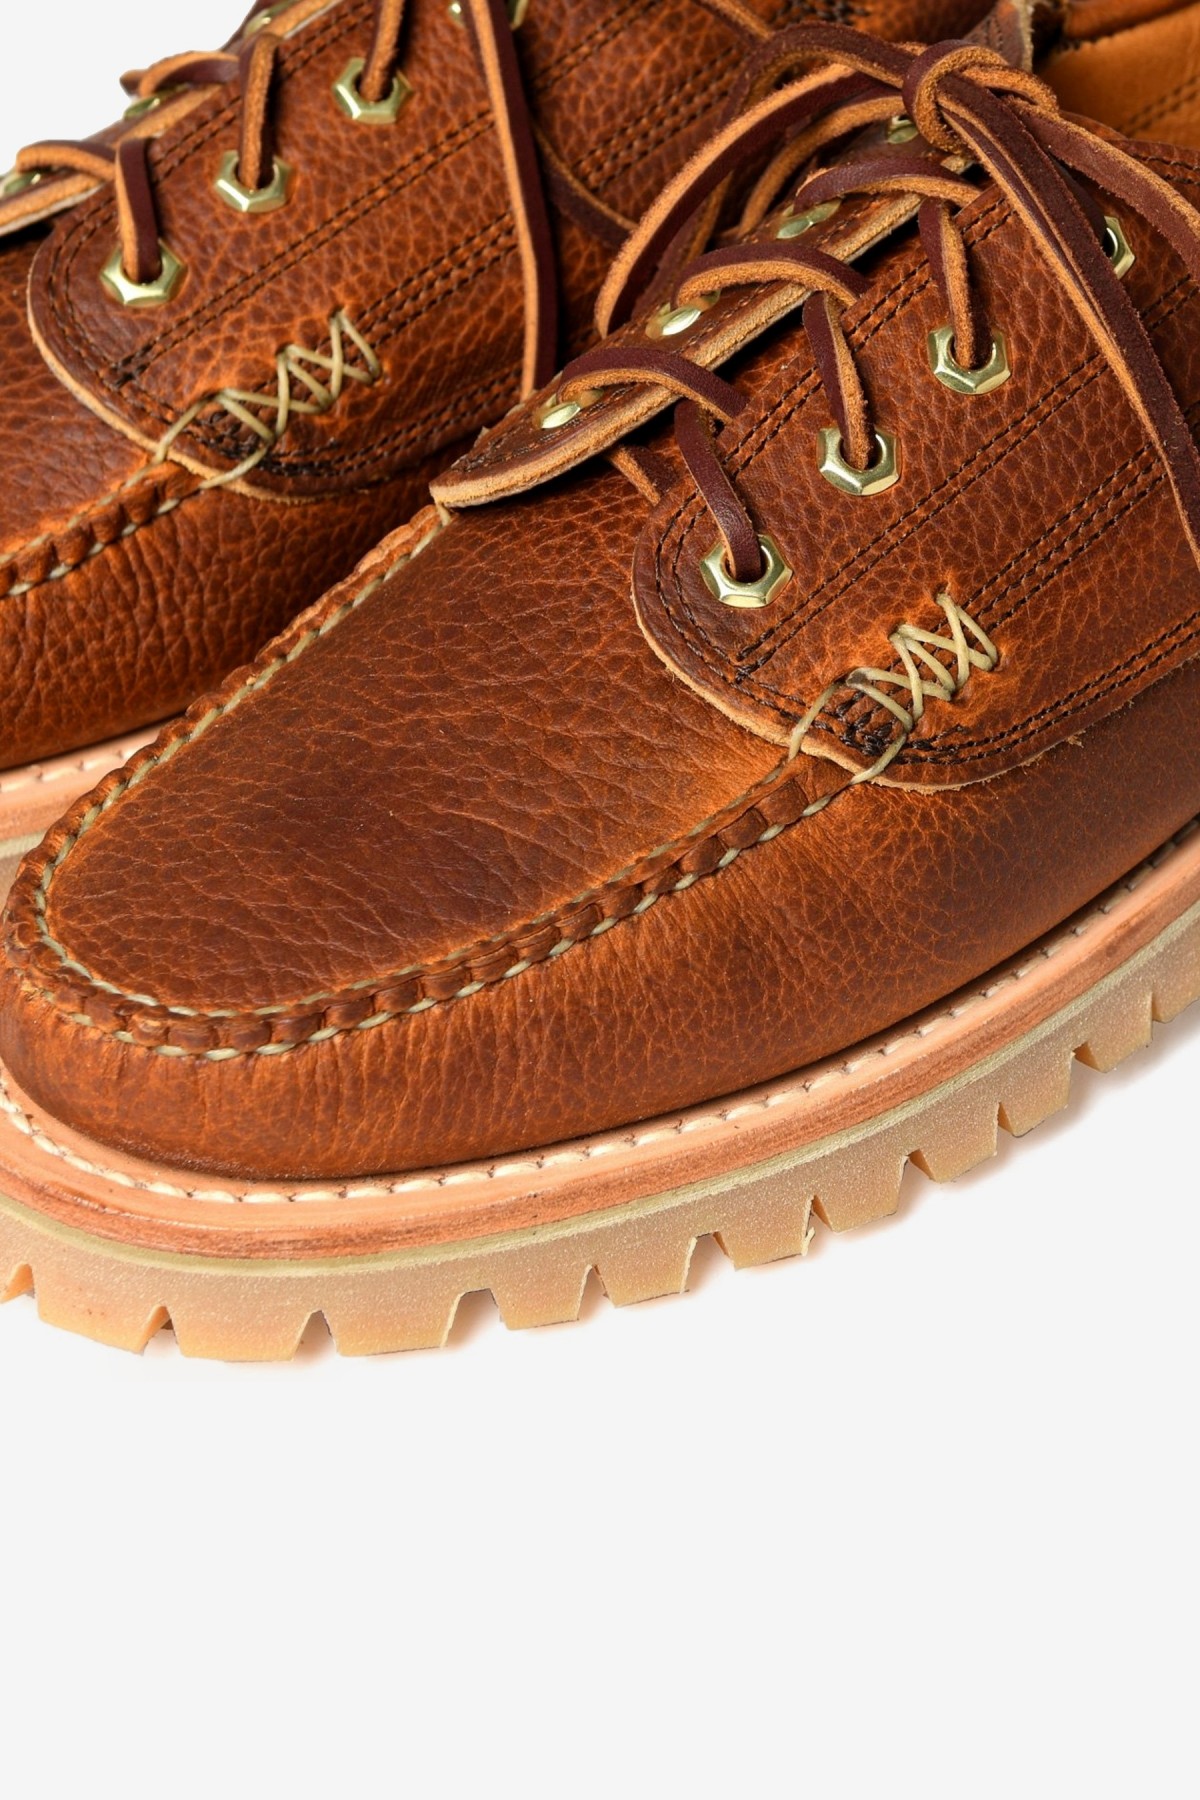 Yuketen Angler Moc Lug Sole in Grizzly